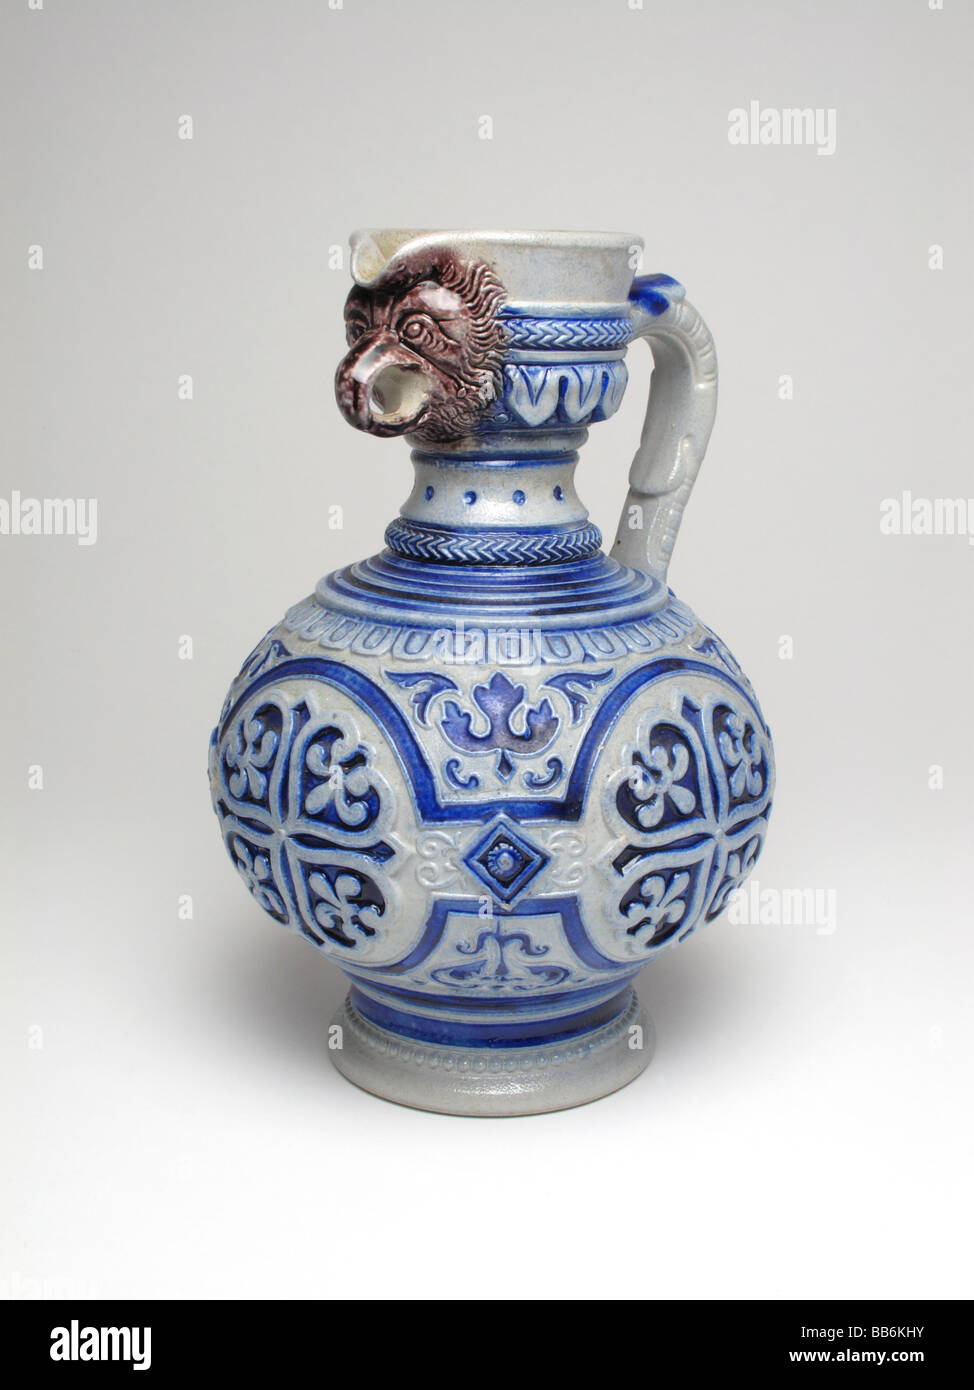 Antique Westerwald stoneware jug with bird spout and Gothic decoration made by Simon Gerz circa 1900 Stock Photo